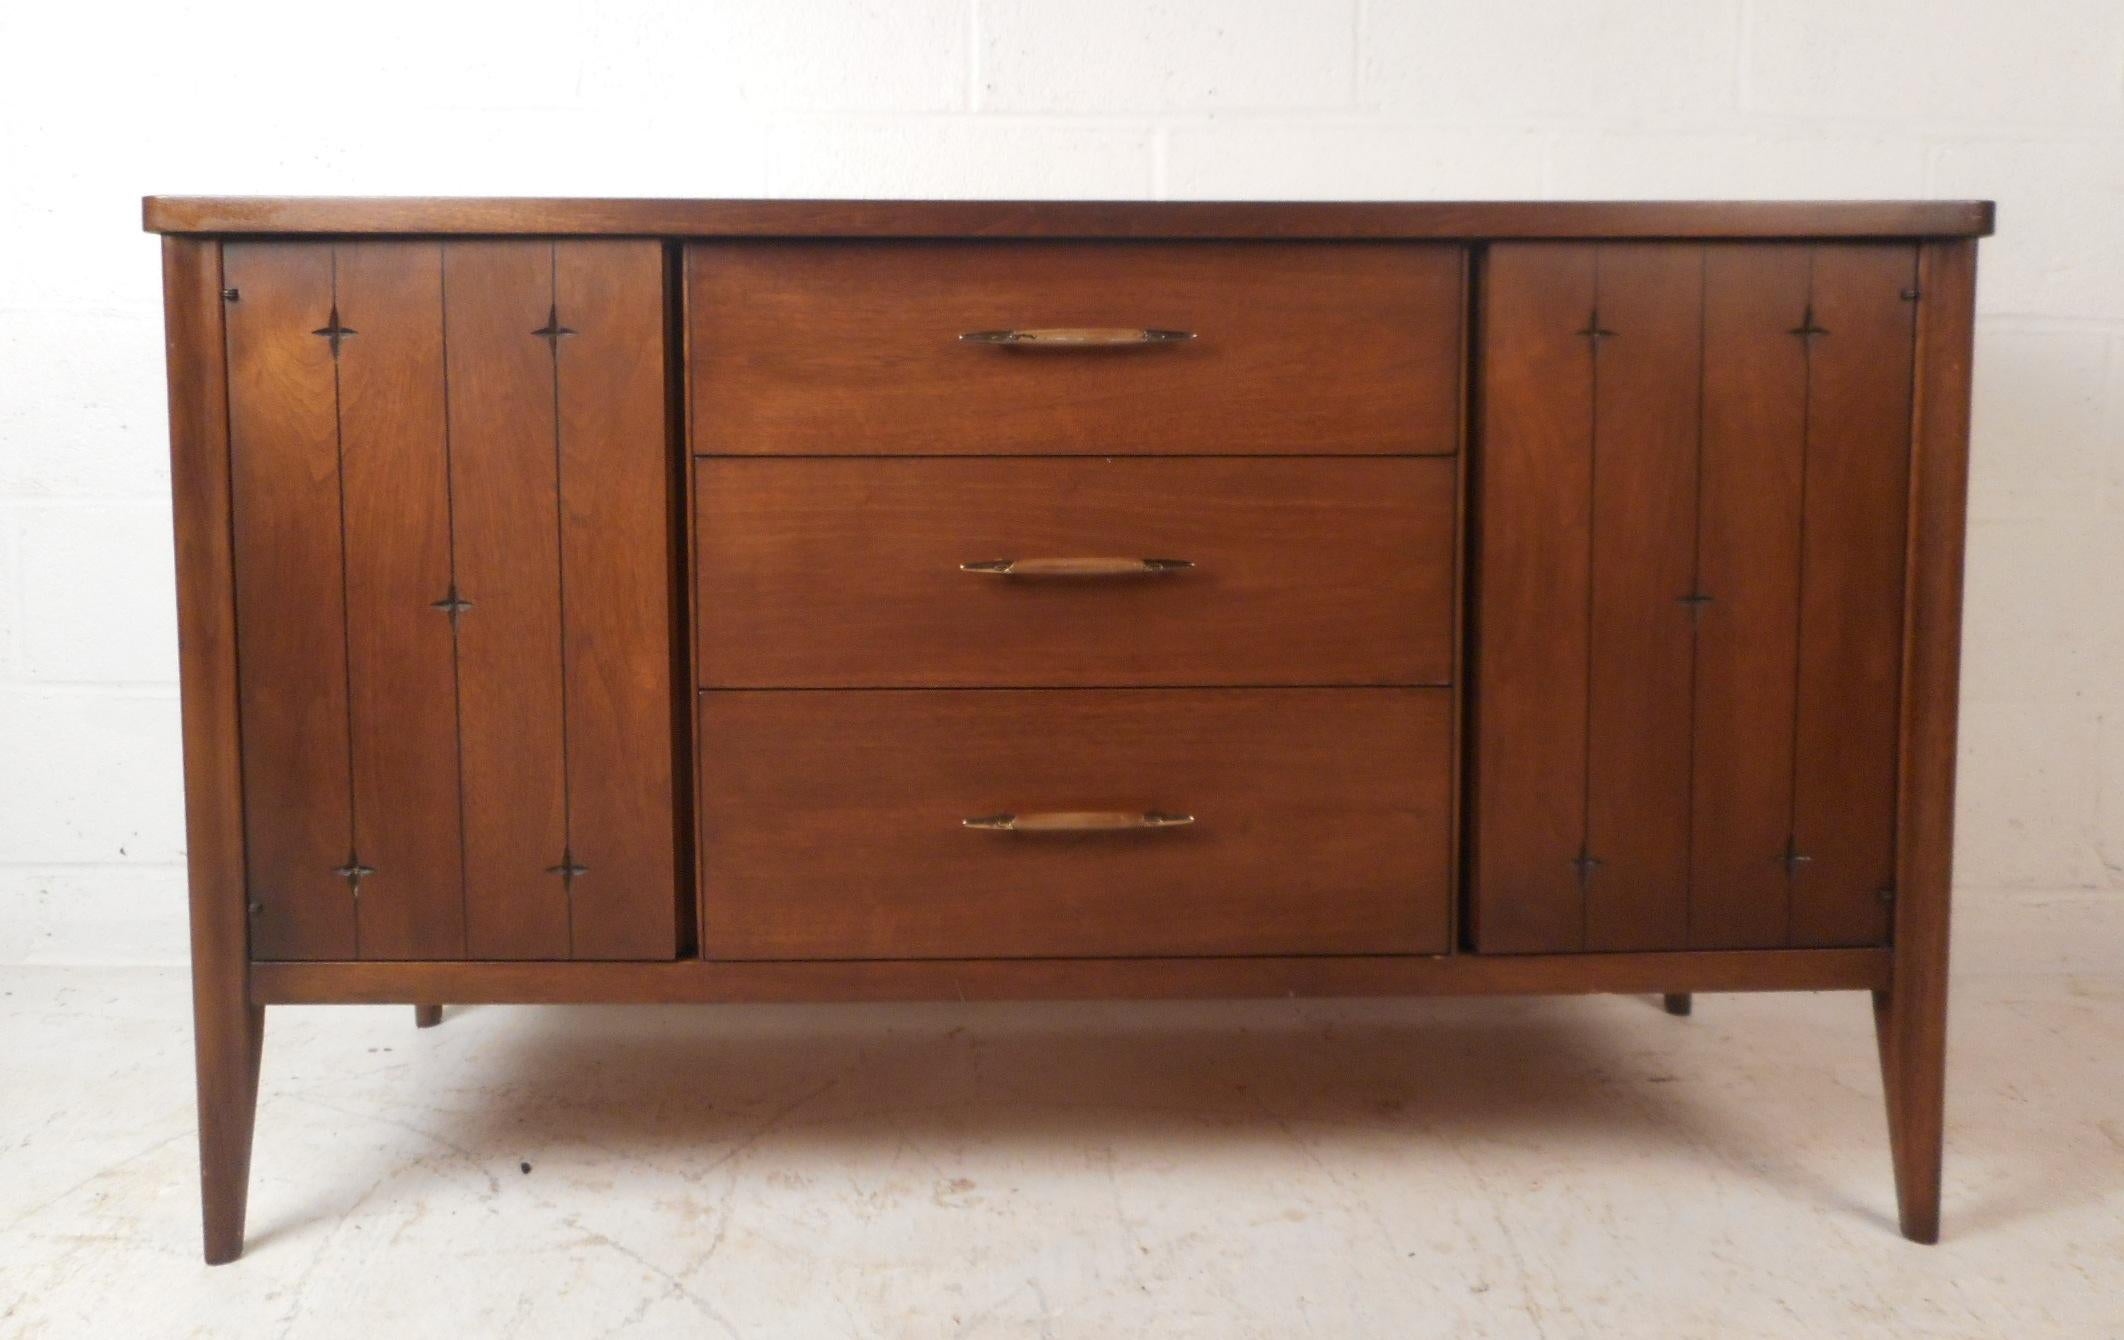 This beautiful vintage modern credenza provides plenty of room for storage within its three large drawers and two compartments hidden by cabinet doors. Sleek design with sculpted drawer pulls, etched designs on the cabinet doors, and tapered legs. A